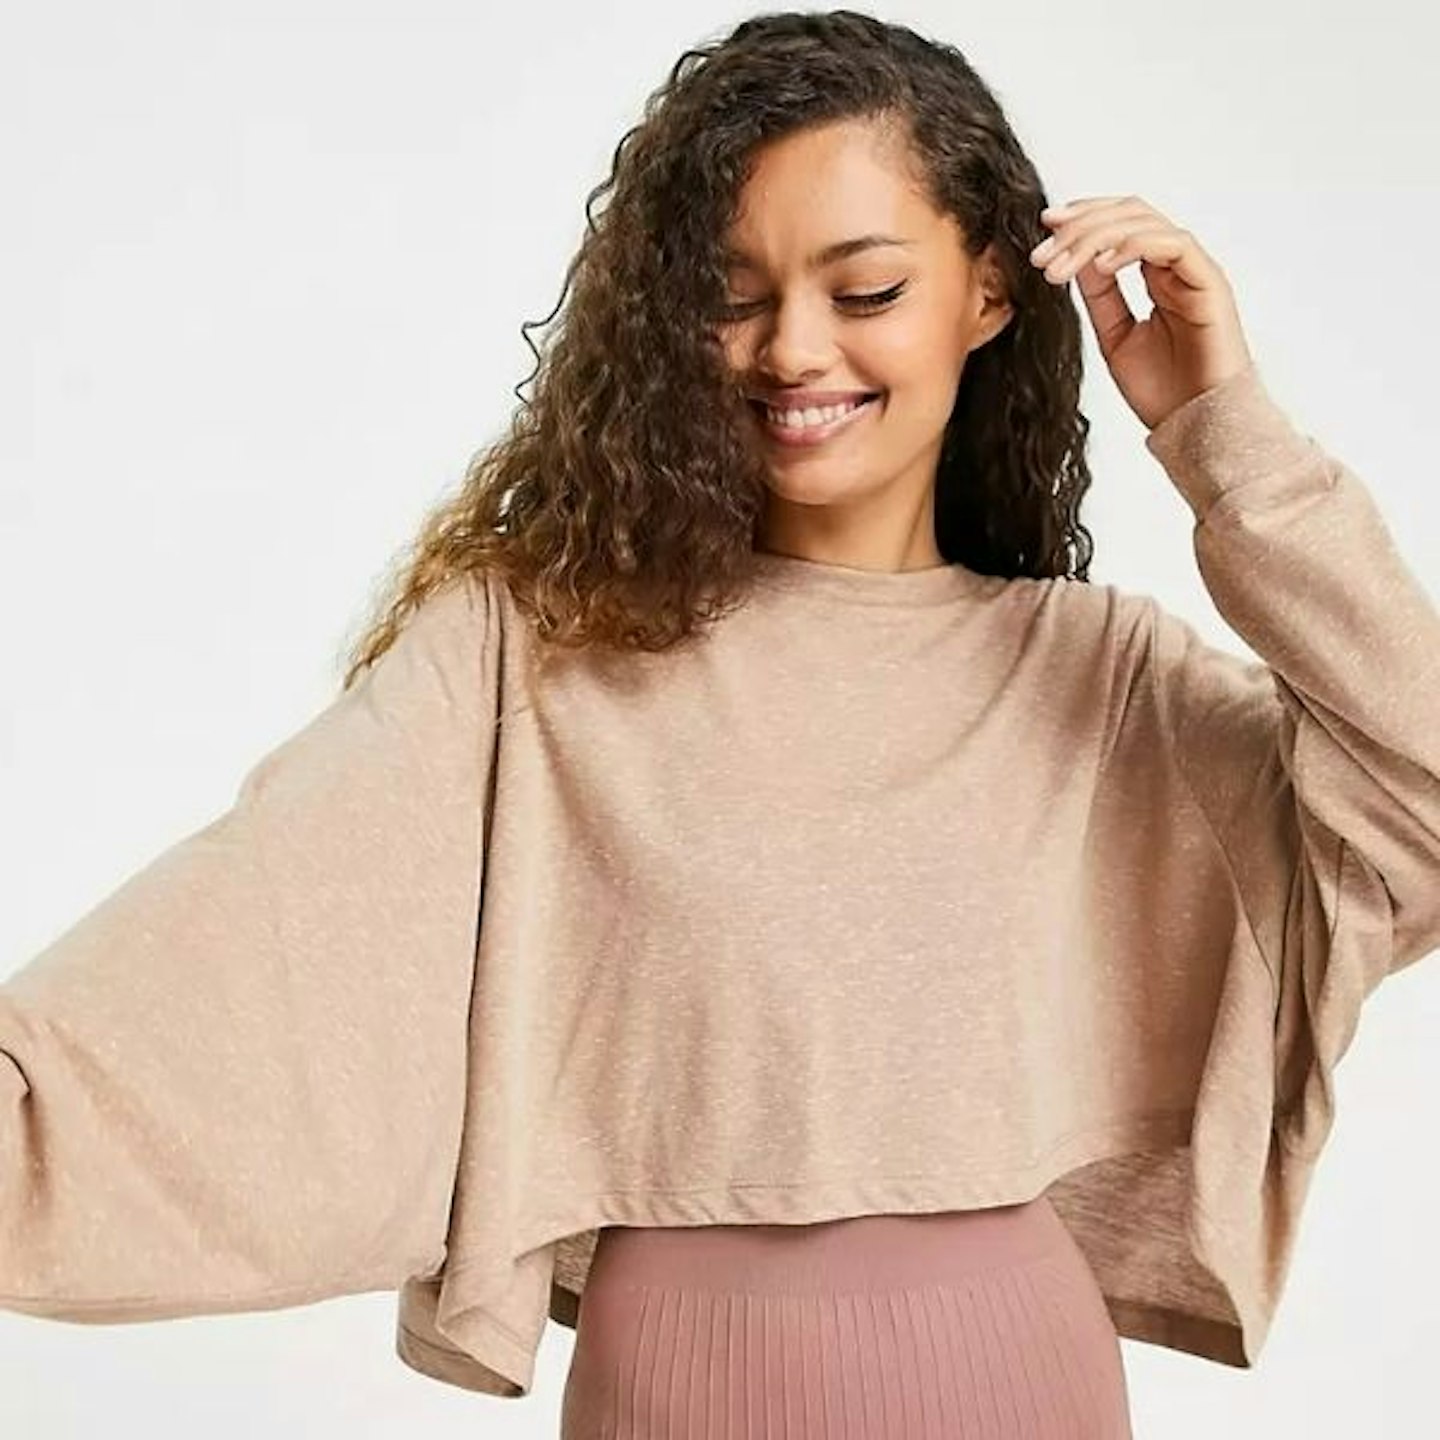 ASOS 4505 Petite yoga long sleeve top with open back detail